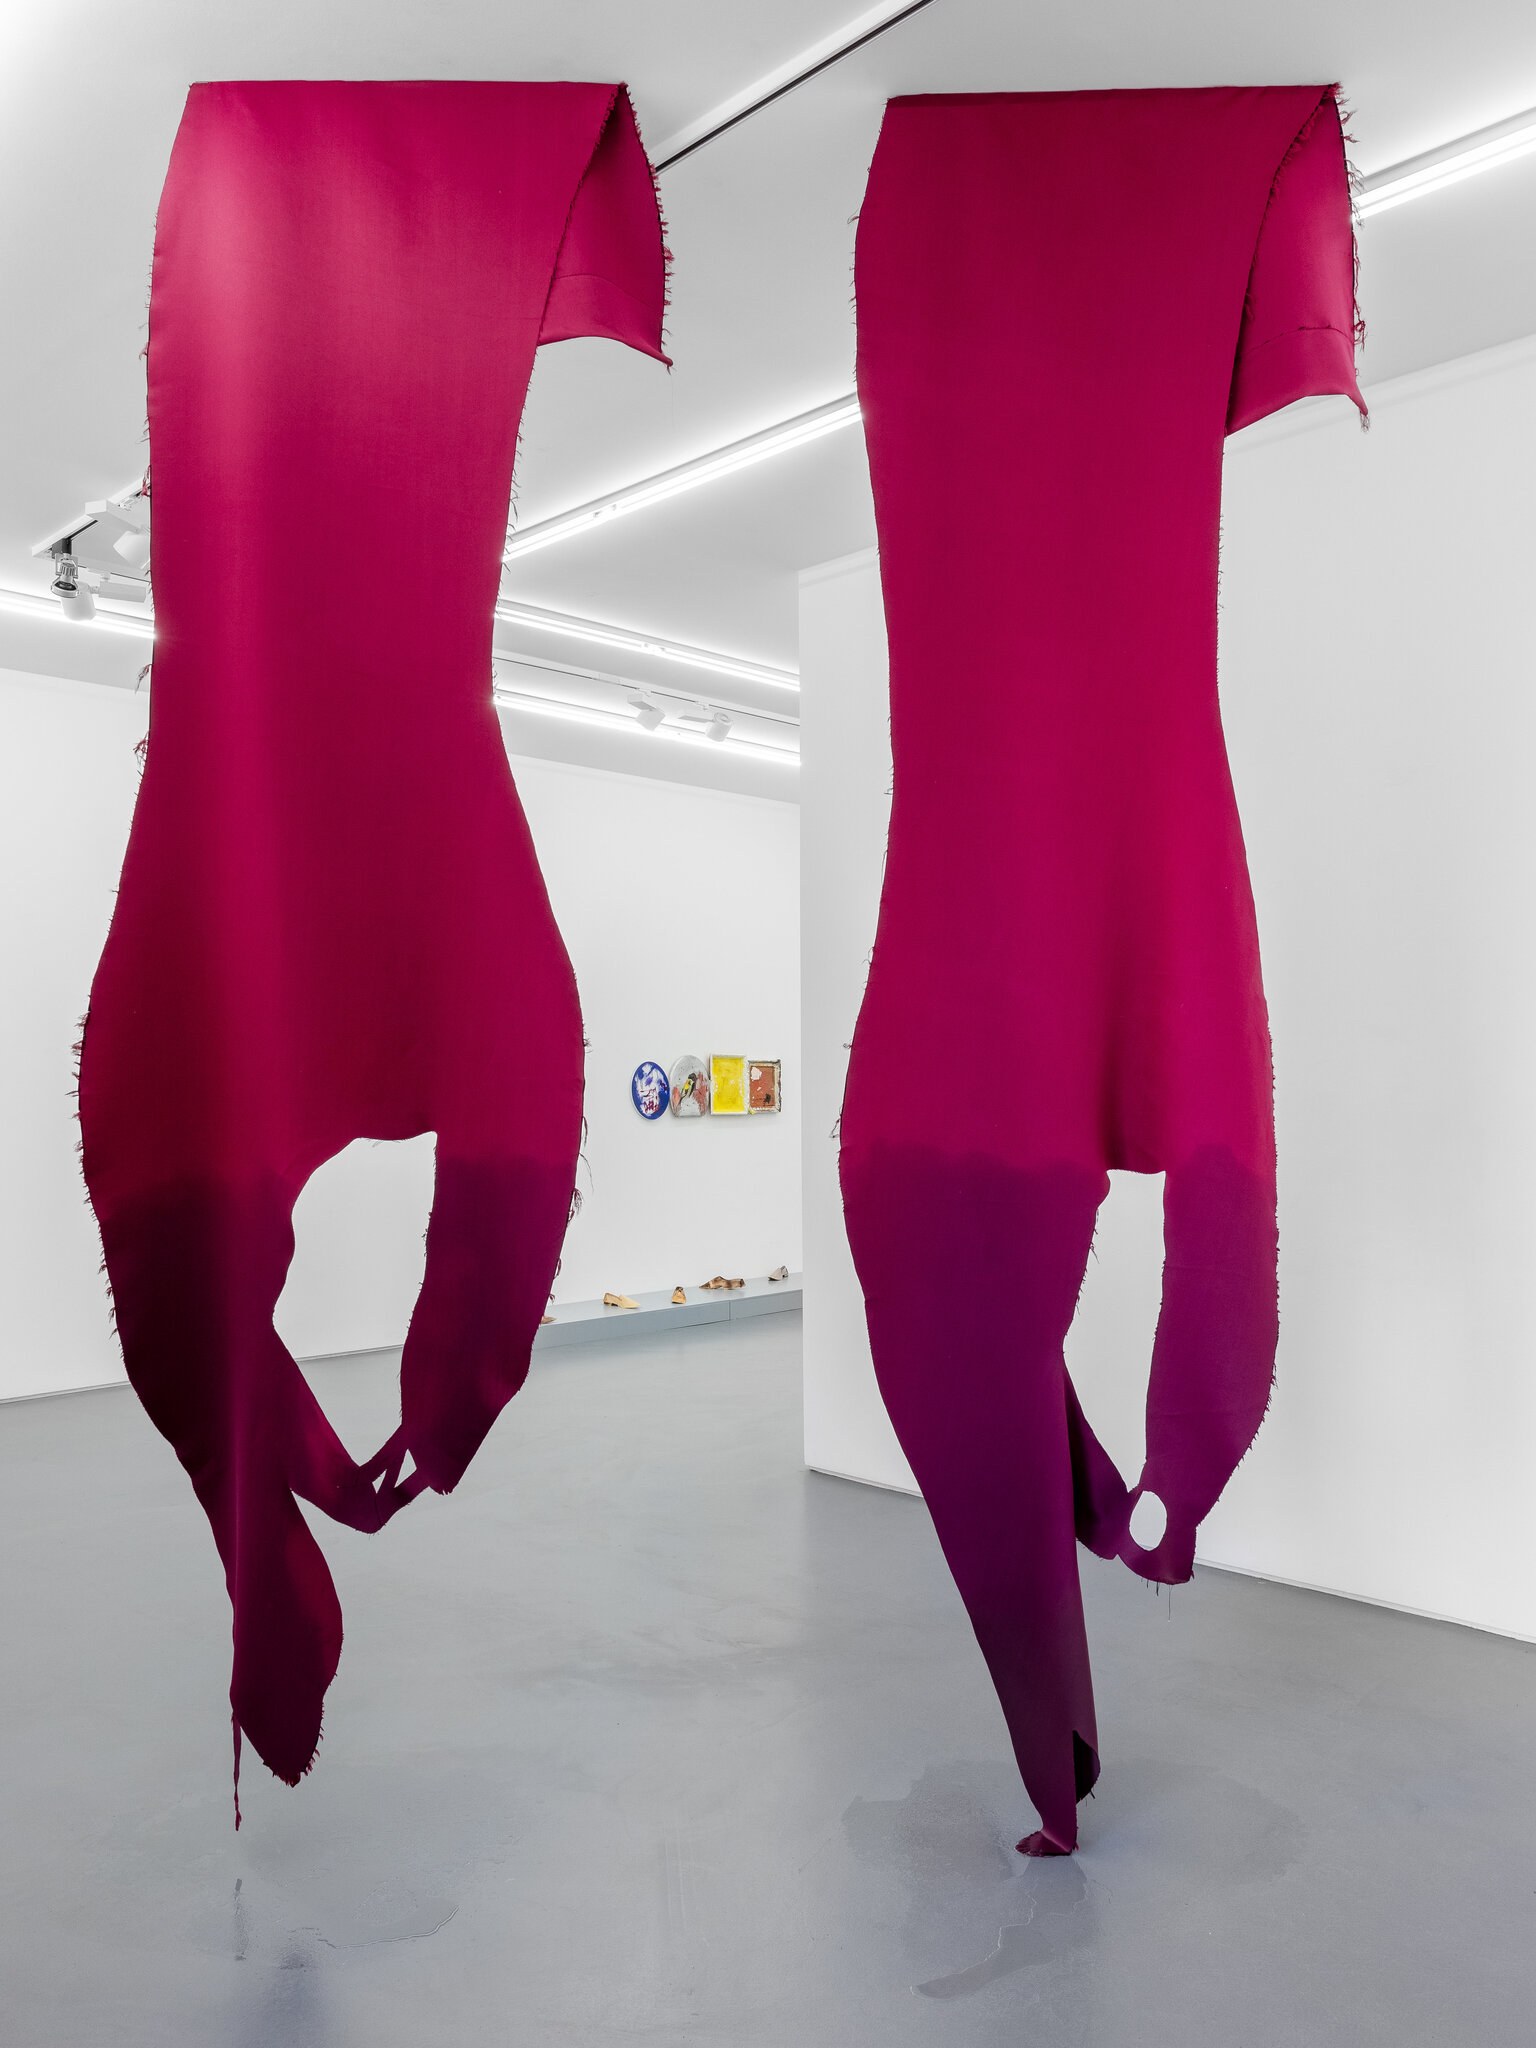 Nele Jäger, Tearing Hands, 2021 · Fabric and water · 365 × 110 cm · Variable heights · Edition 1/1 + 1 AP · Unique